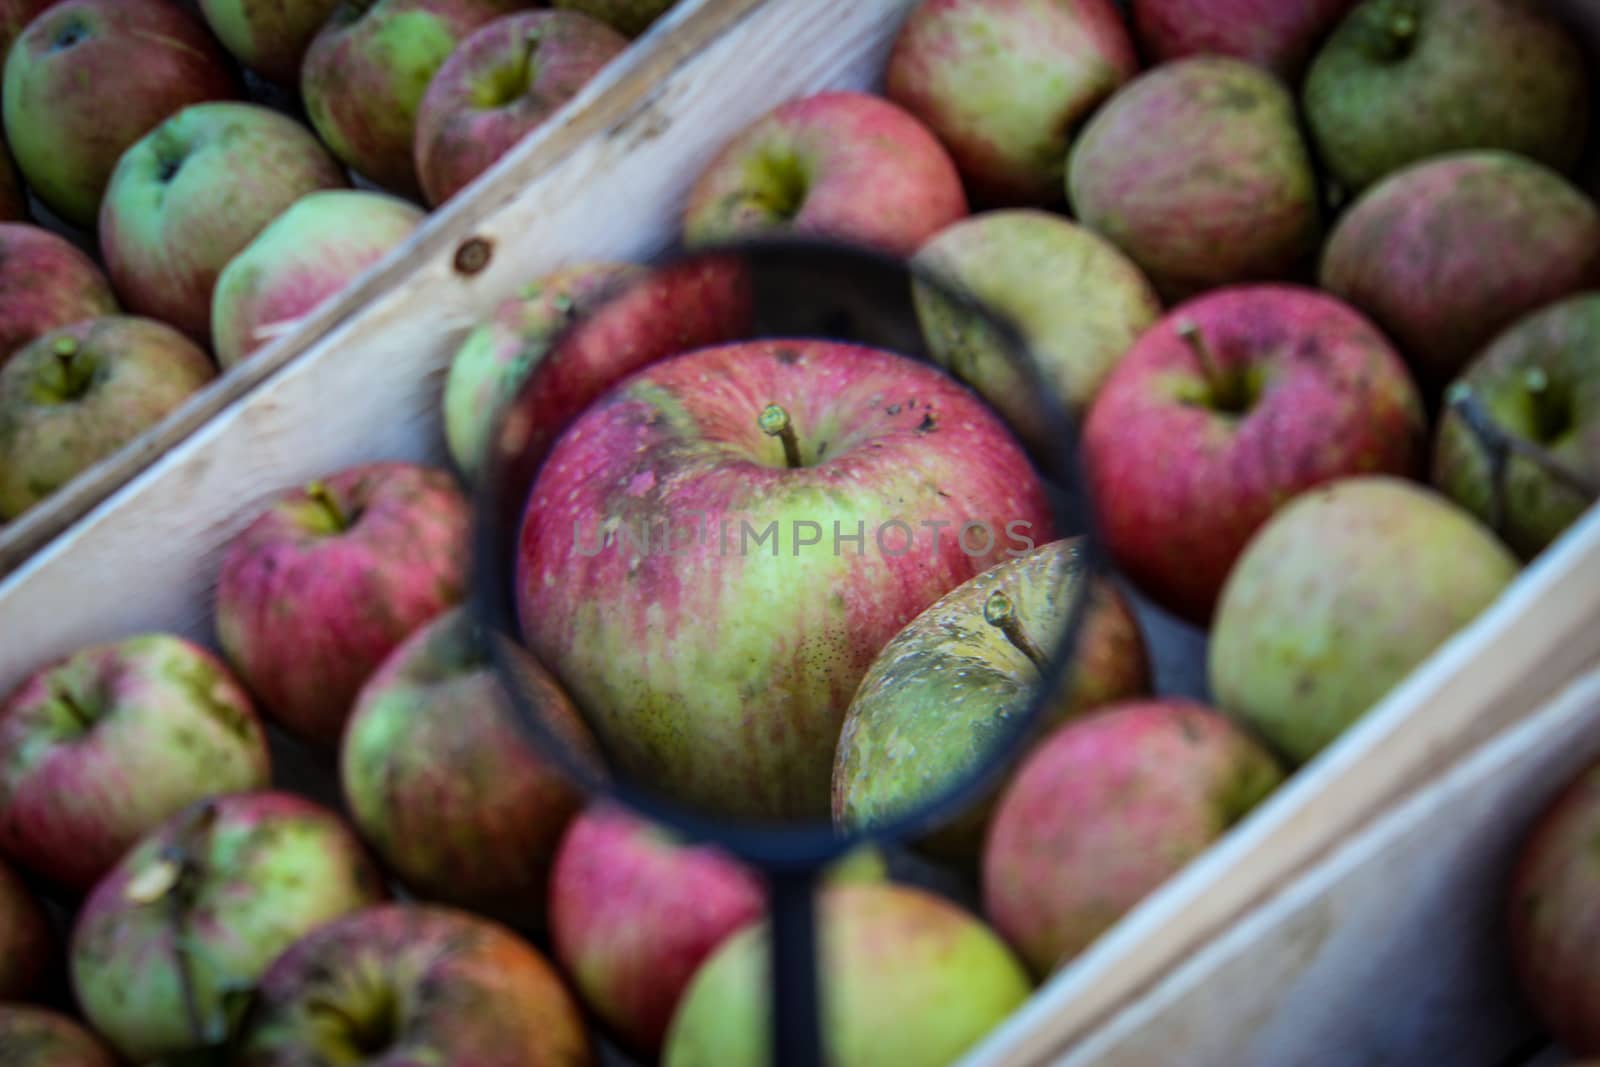 One apple magnified with a magnifying glass among the other apples in the crate. by mahirrov